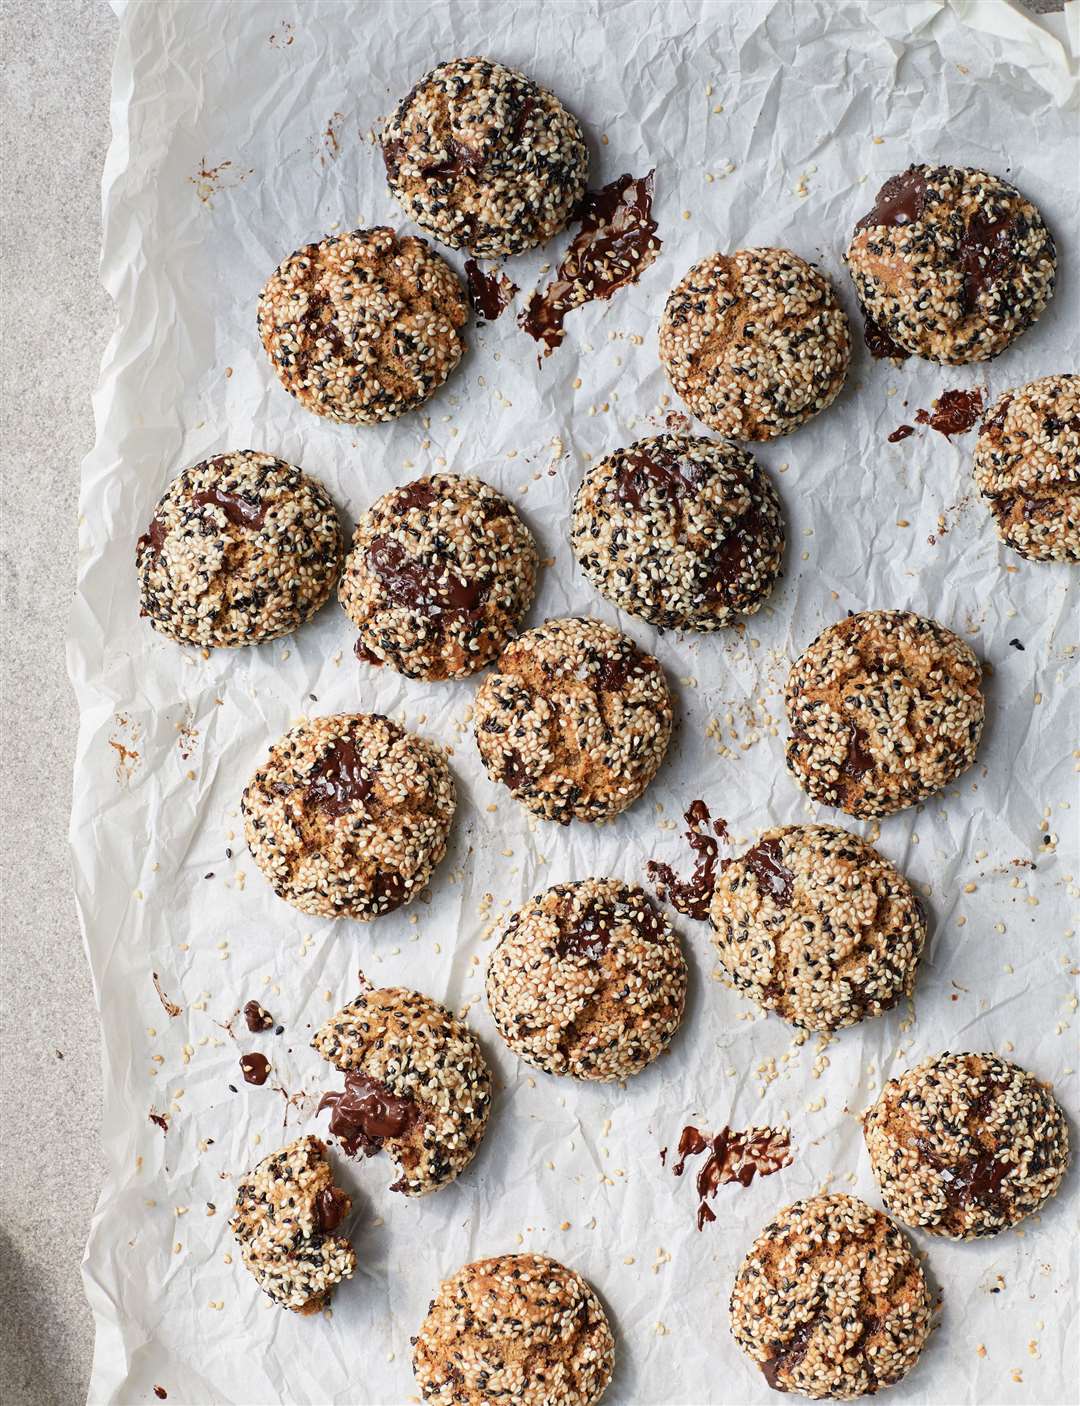 Try these tasty tahini cookies. Picture: Ebury Press/Philippa Langley/PA